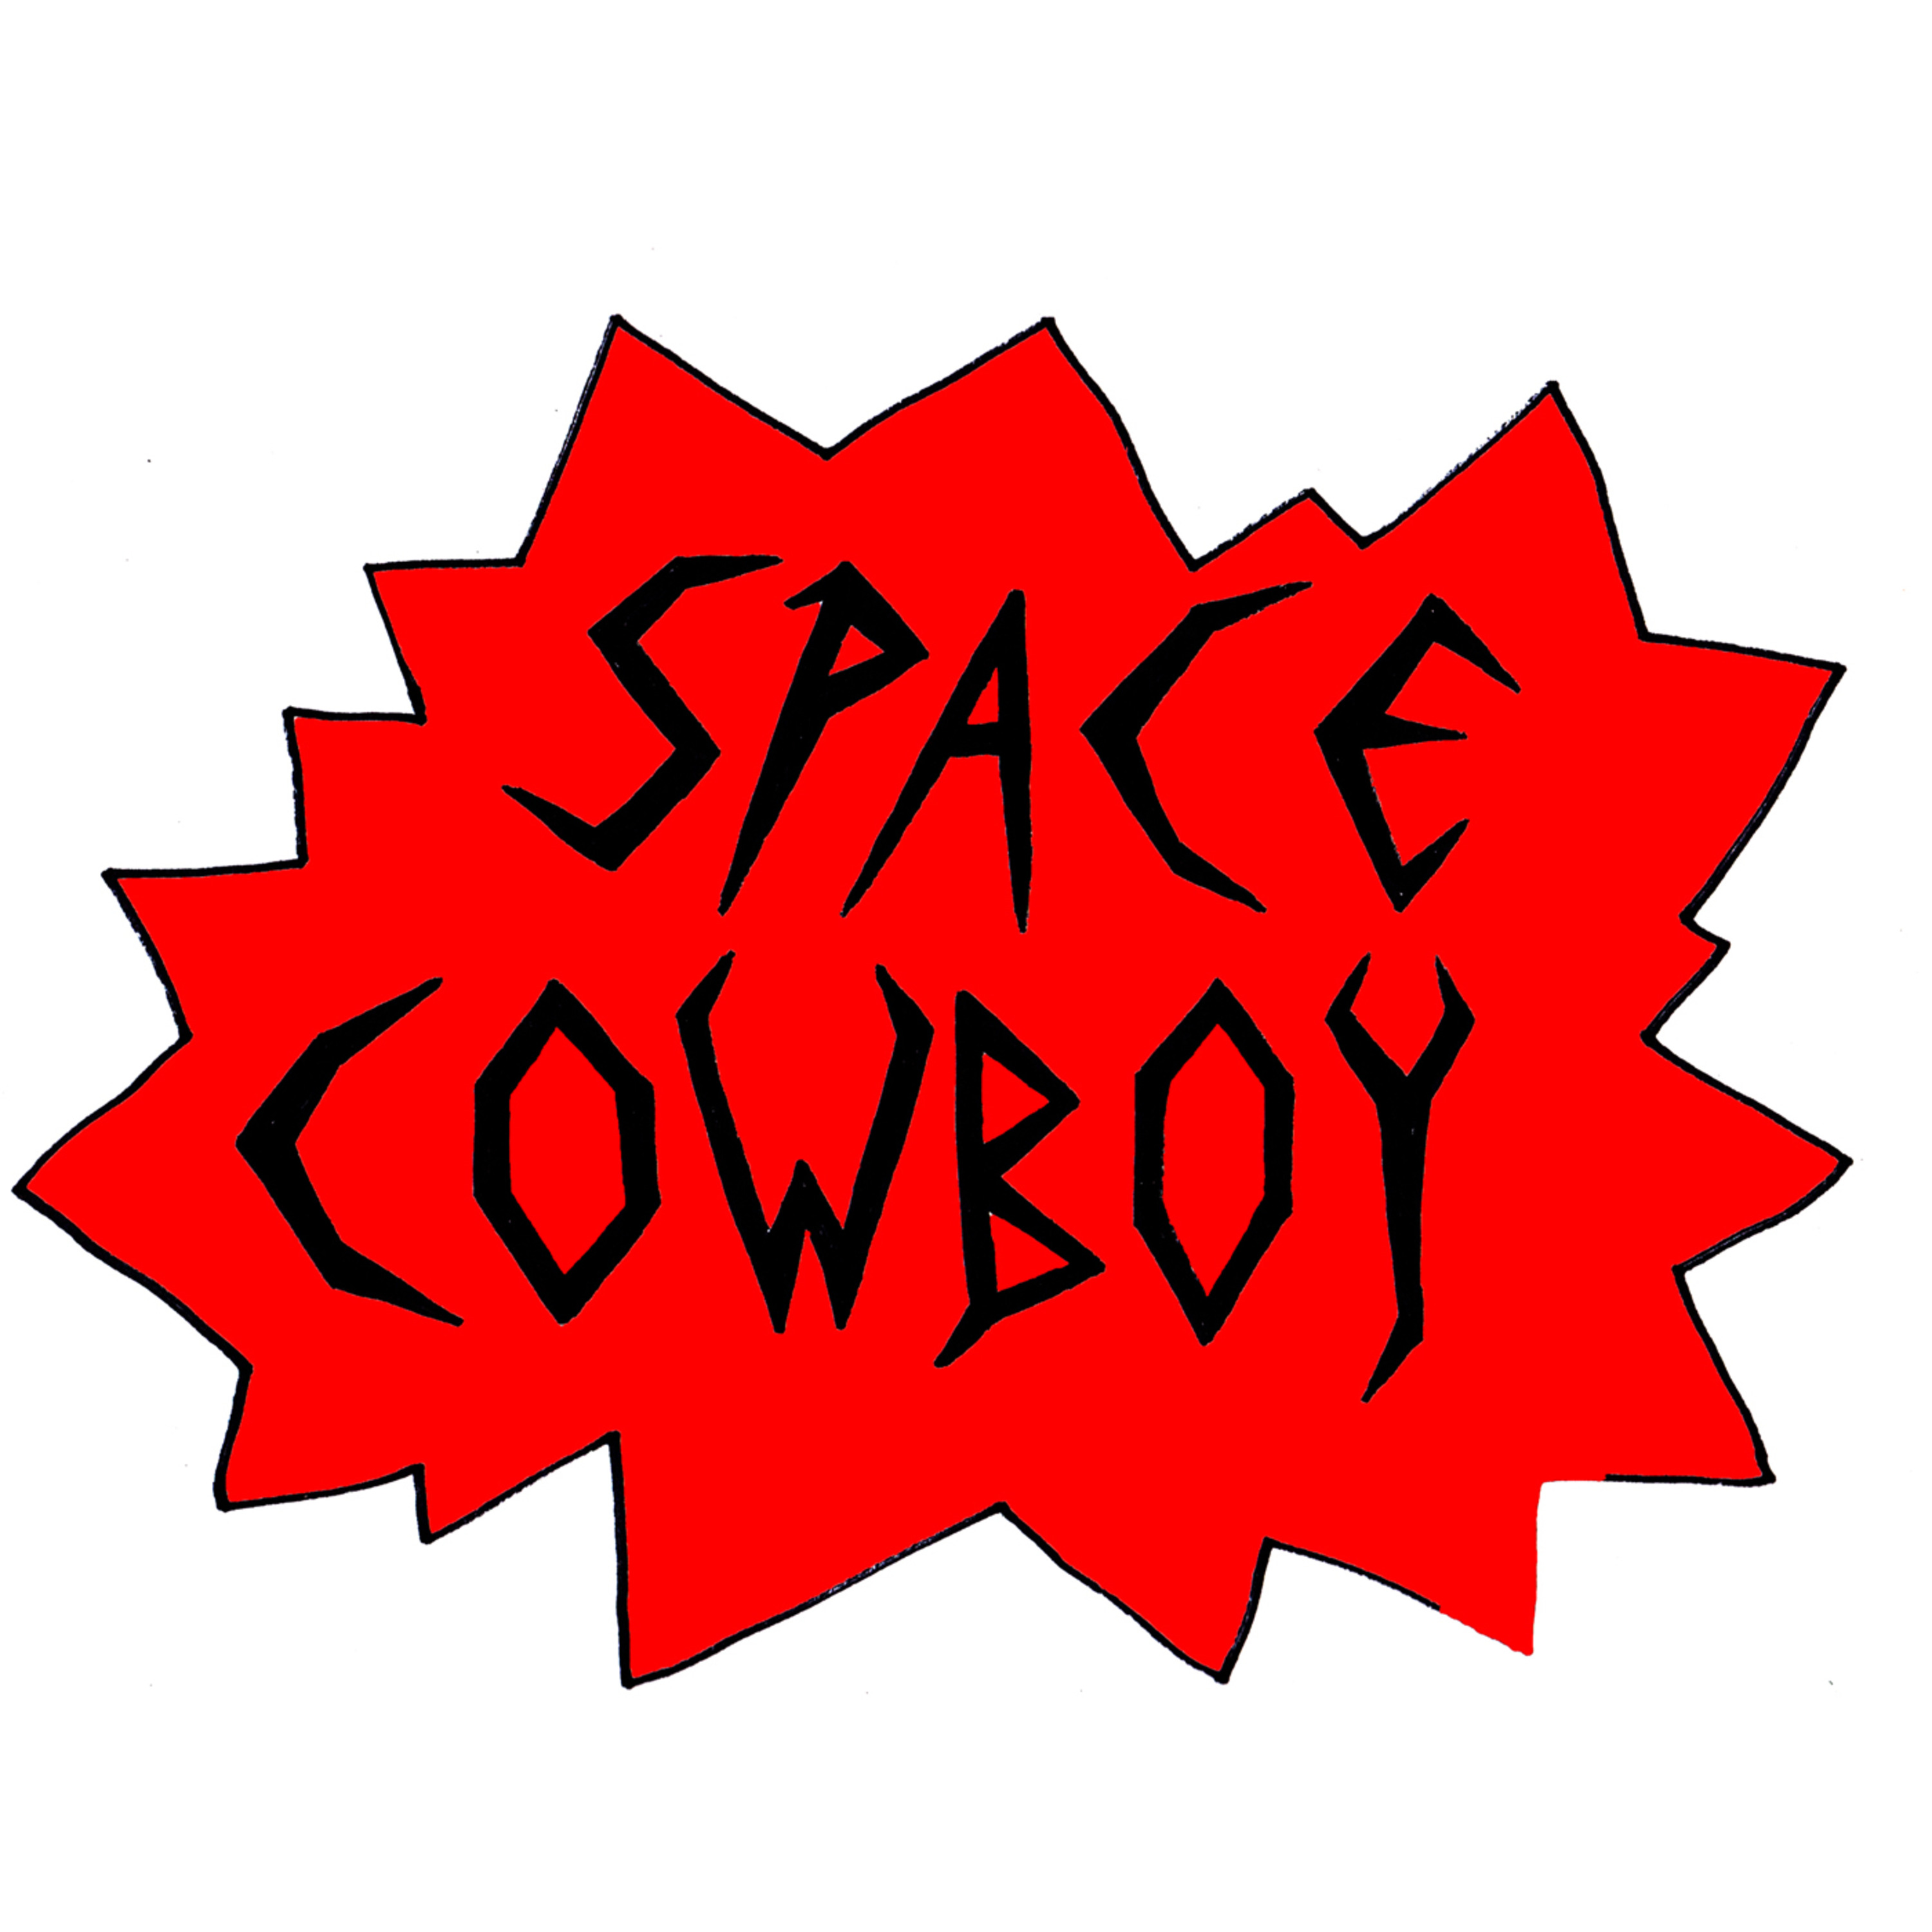 "Space Cowboy Books Presents: Simultaneous Times" Podcast